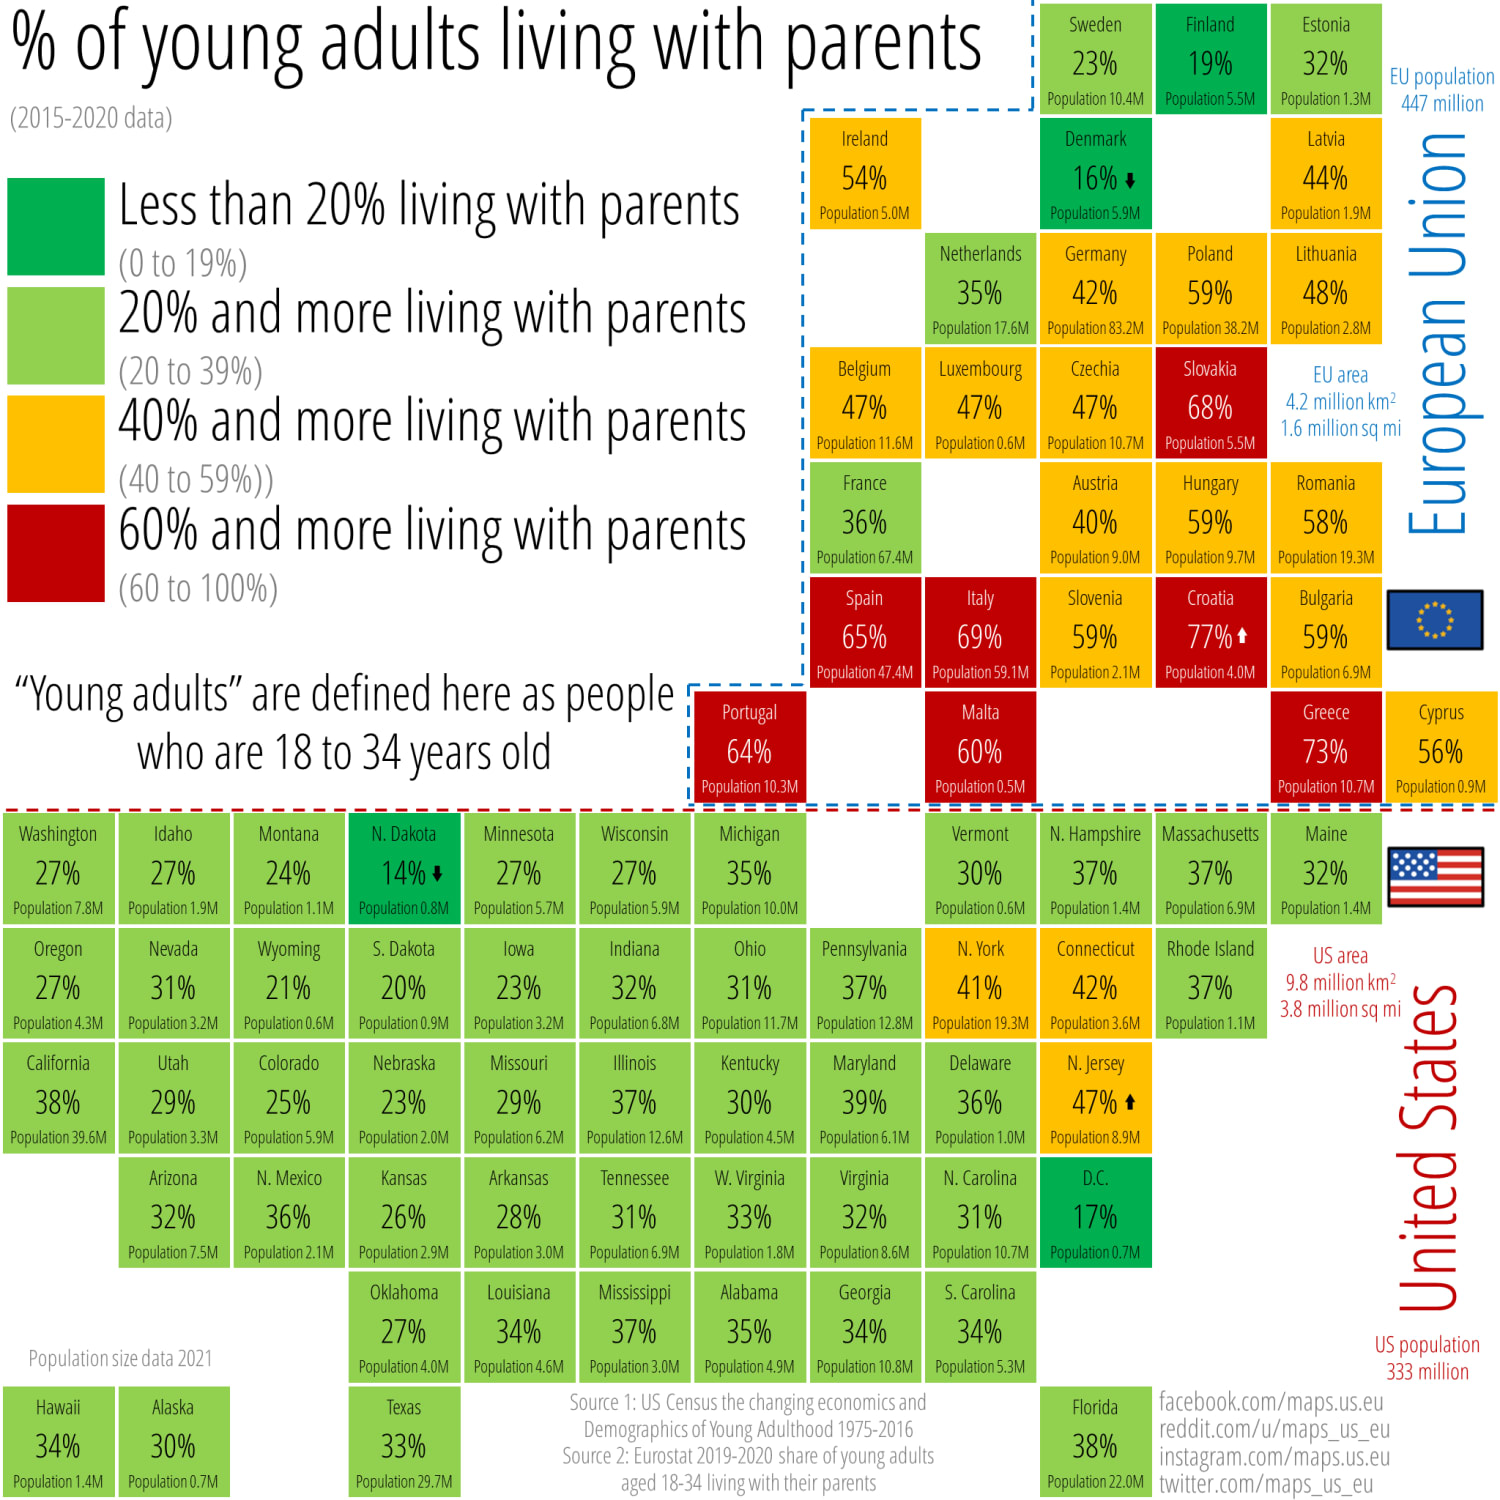 Percent of young adults living with their parents across the US and the EU. “Young adults” are defined here as people who are 18 to 34 years old. 2015-2020 data ️